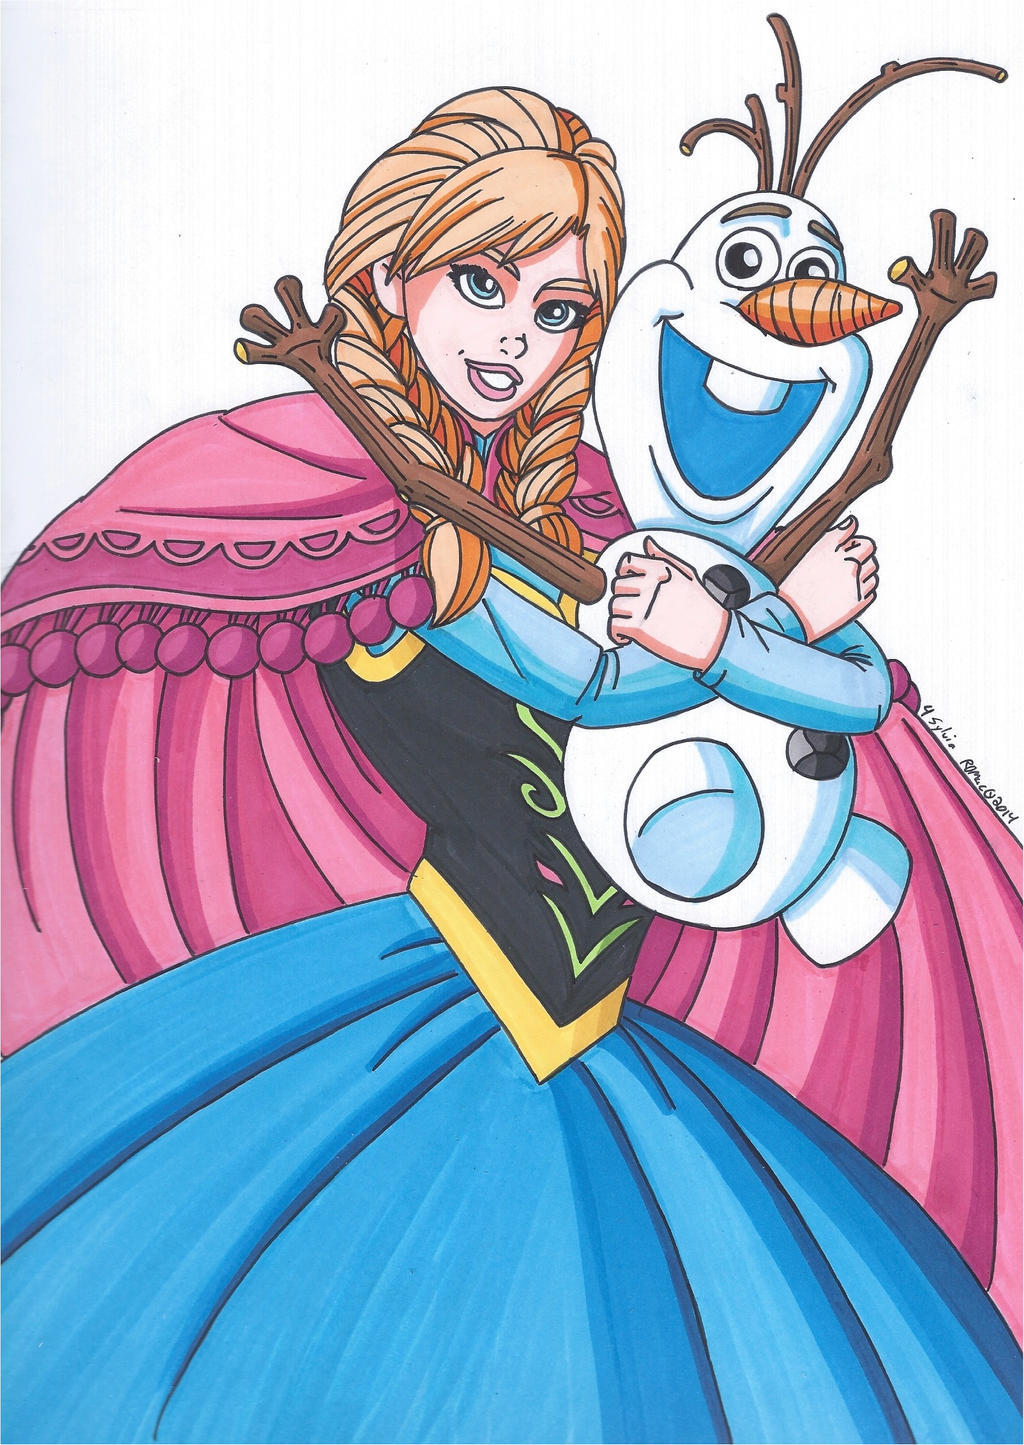 Serie van Chaise longue Pekkadillo Frozen- Anna and Olaf by RobertMacQuarrie1 on DeviantArt